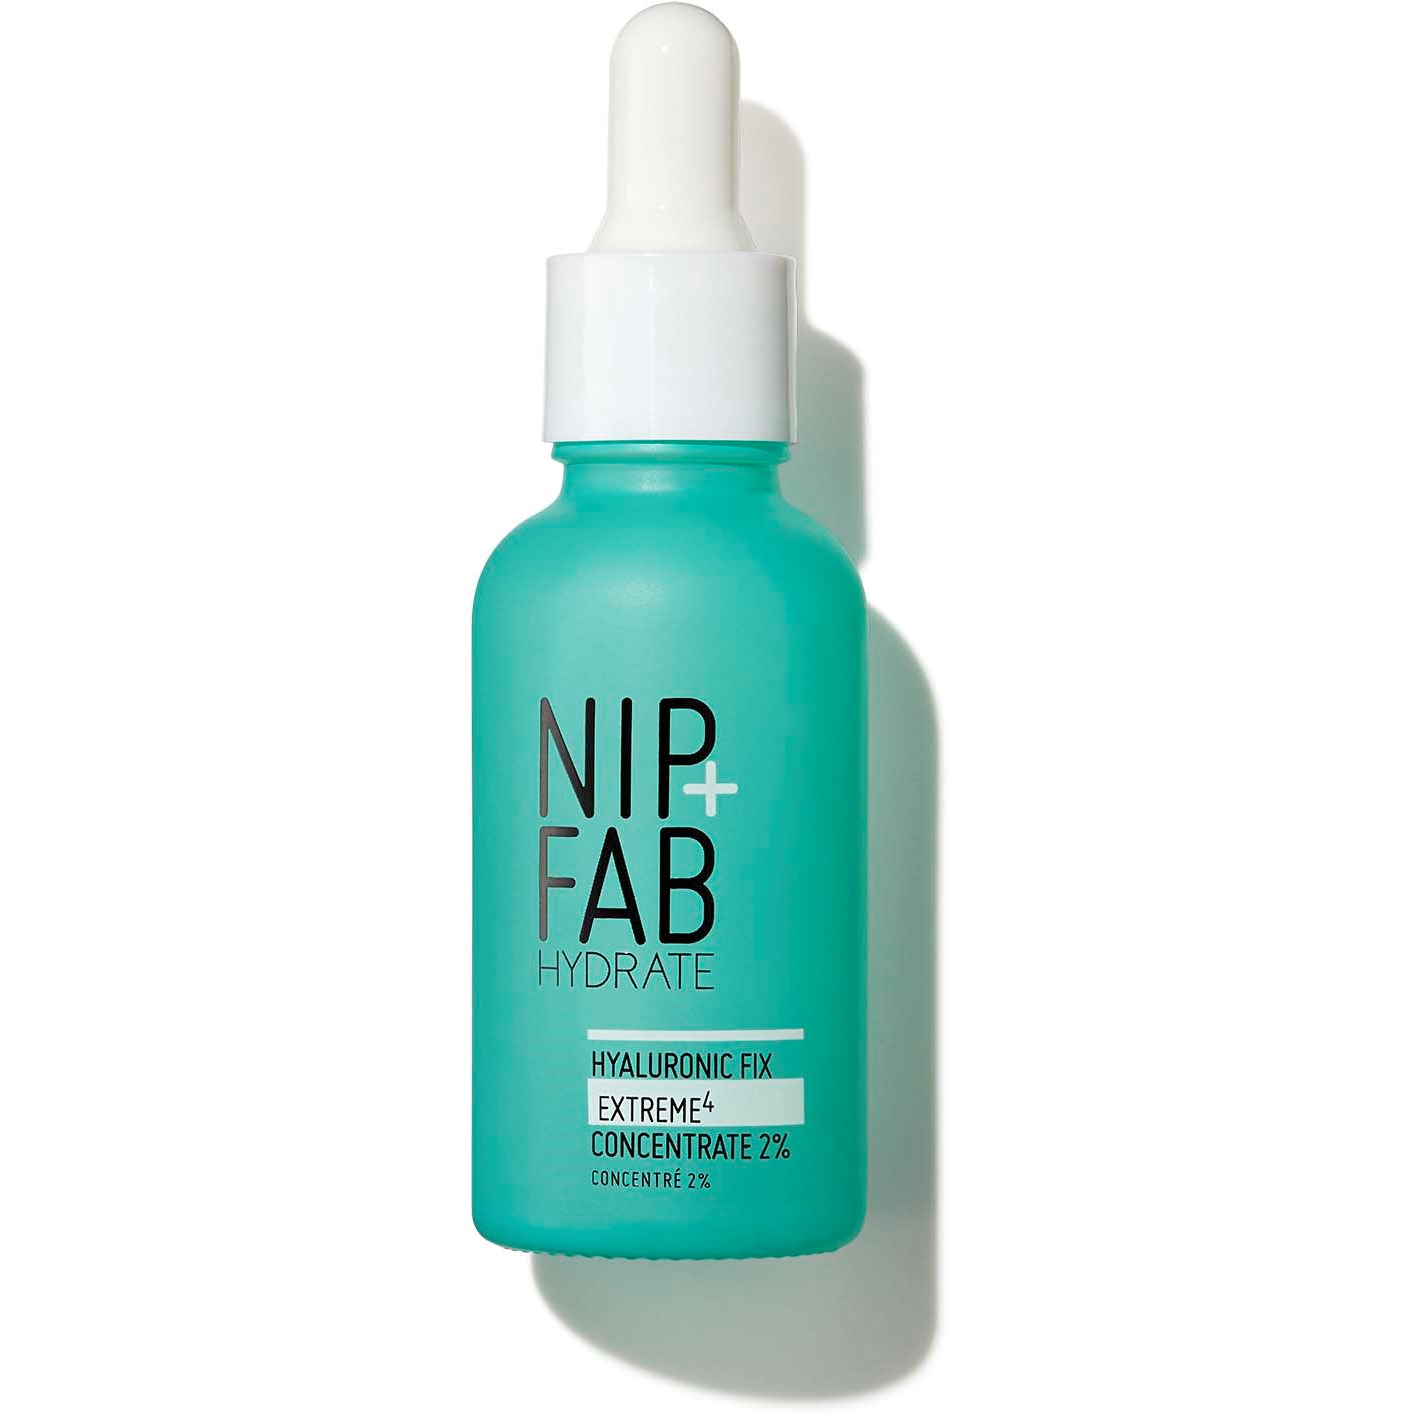 Läs mer om NIP+FAB Hydrate Hyaluronic Fix Extreme4 Concentrate 2% 30 ml